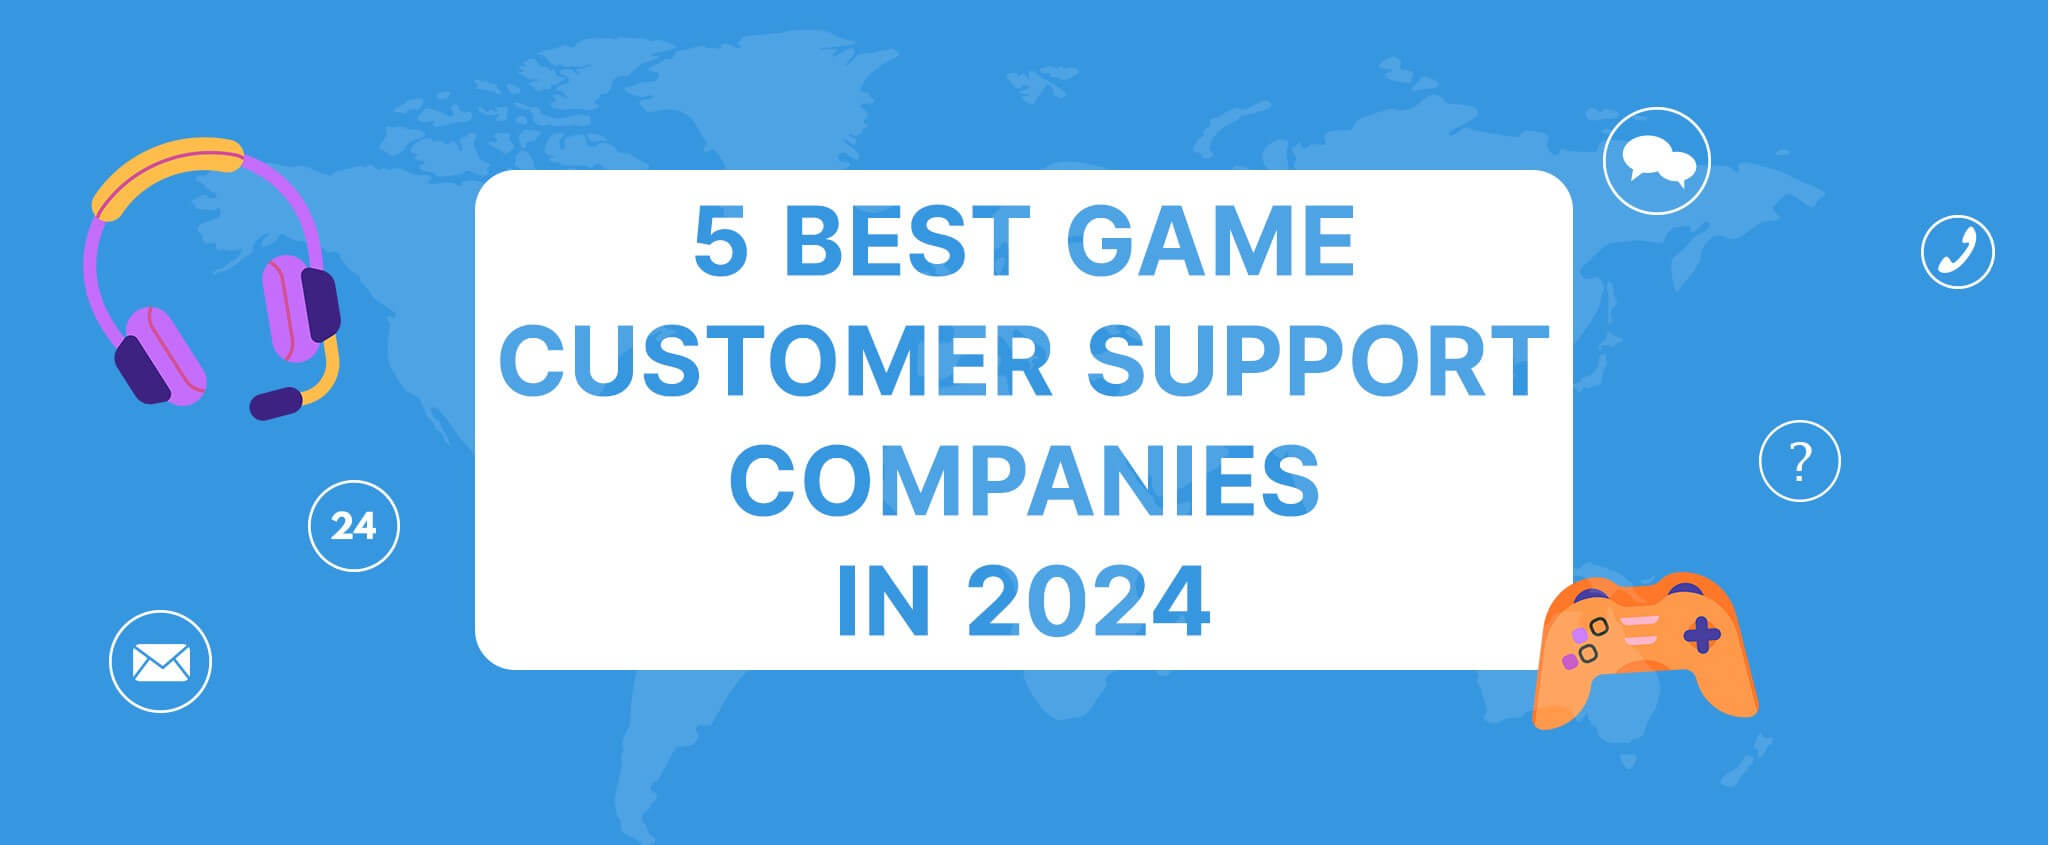 5 Best Game Customer Support Companies in 2024